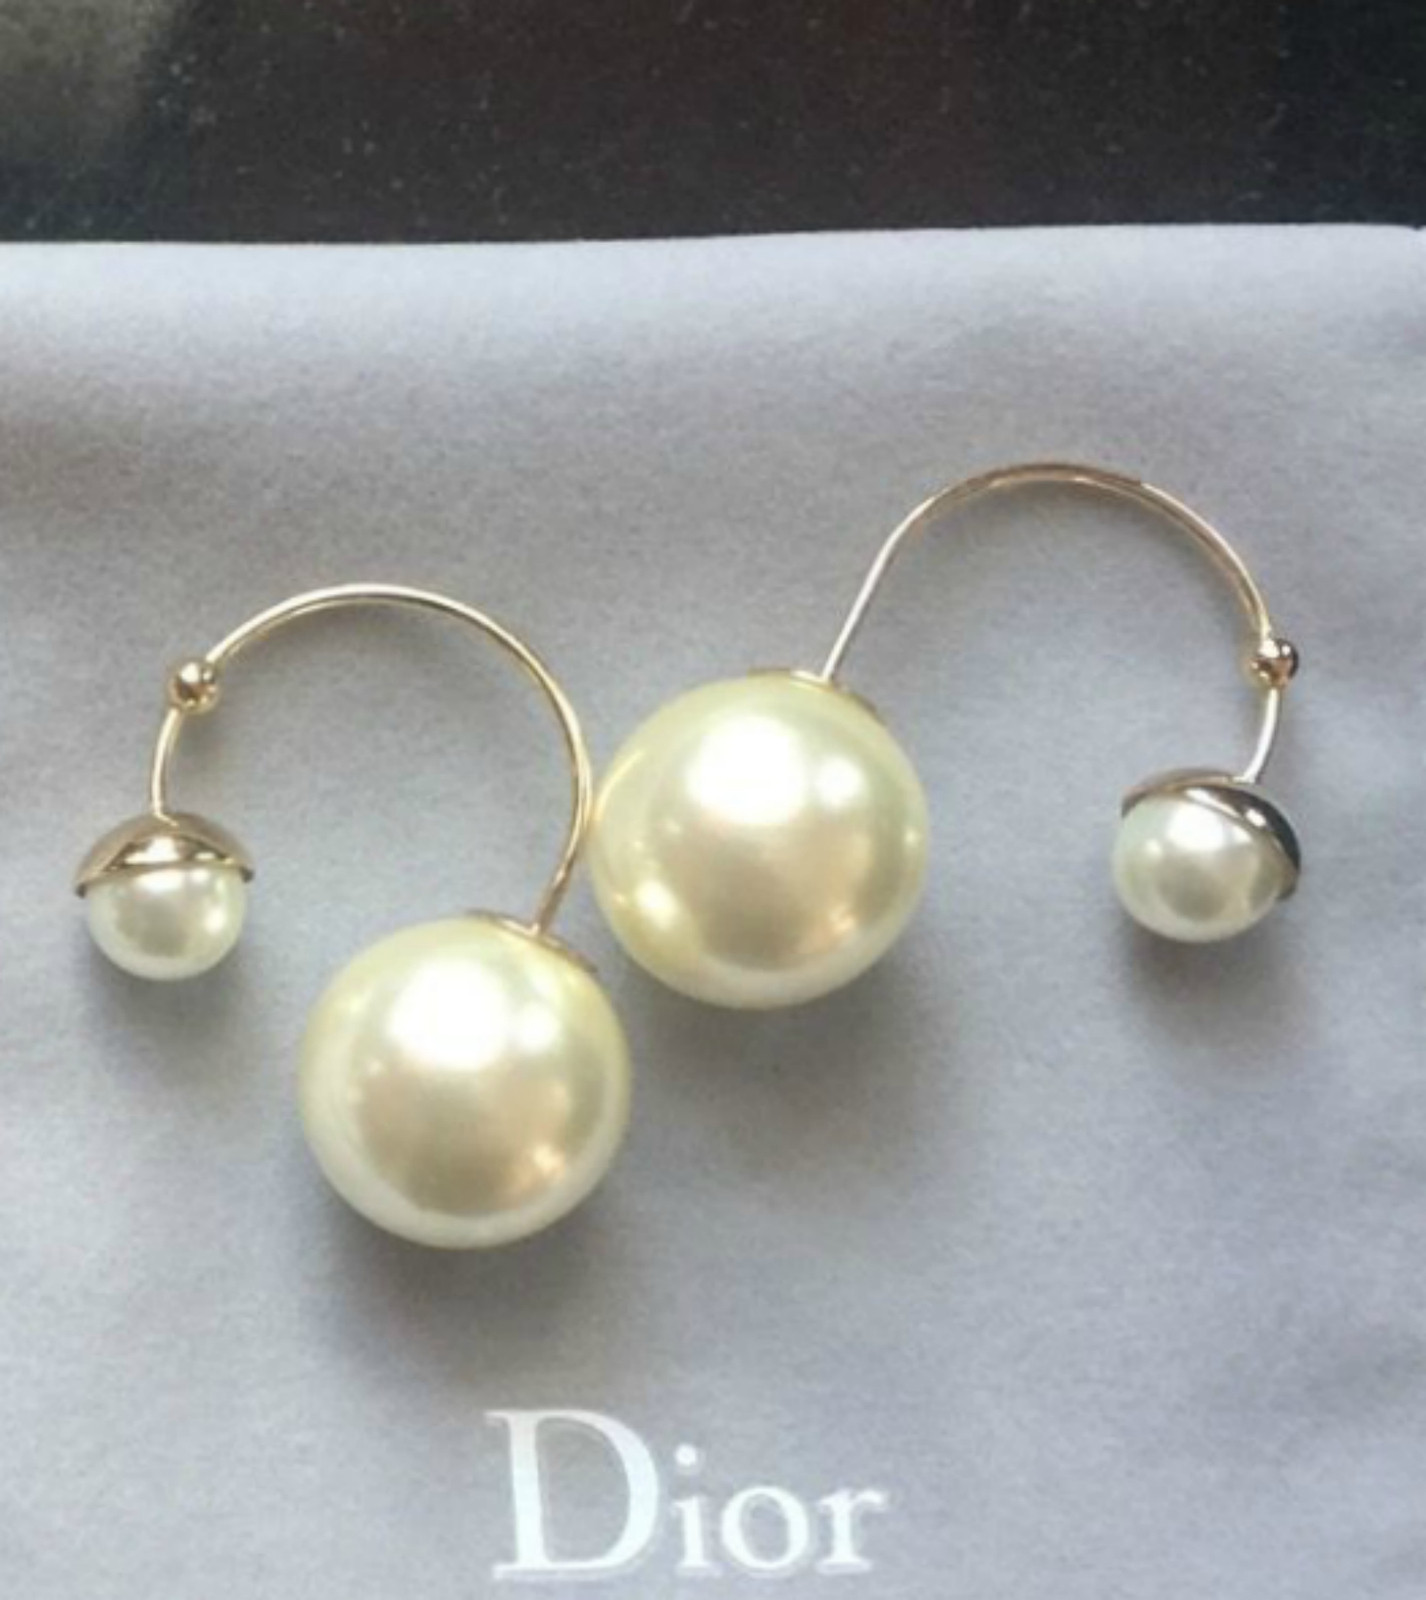 Dior Double Pearl Earrings
 Authentic Christian Dior ULTRADIOR Double Pearl Earrings